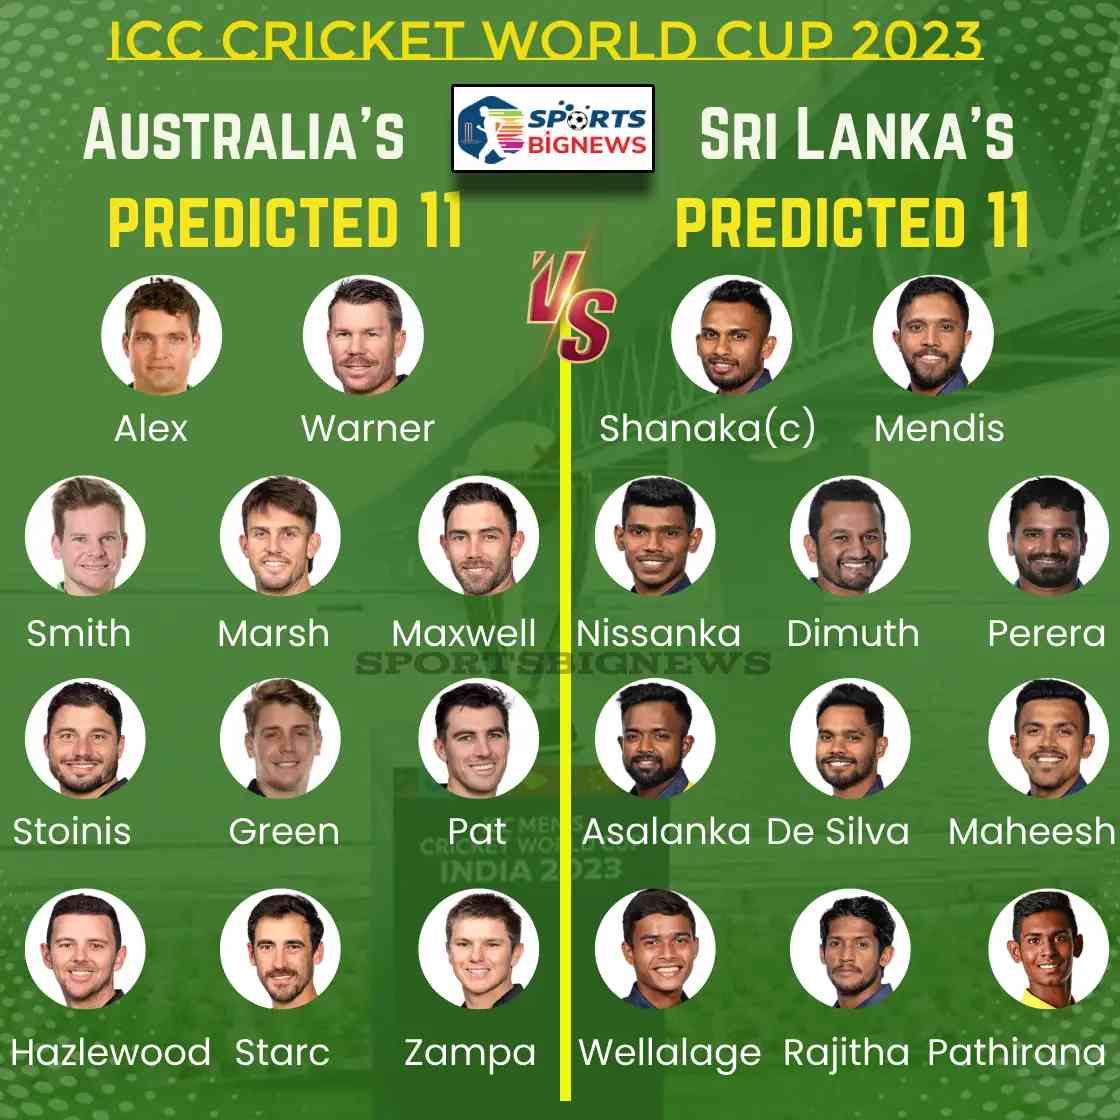 AUS Vs SL, Dream 11, Playing 11 For Cricket World Cup 2023